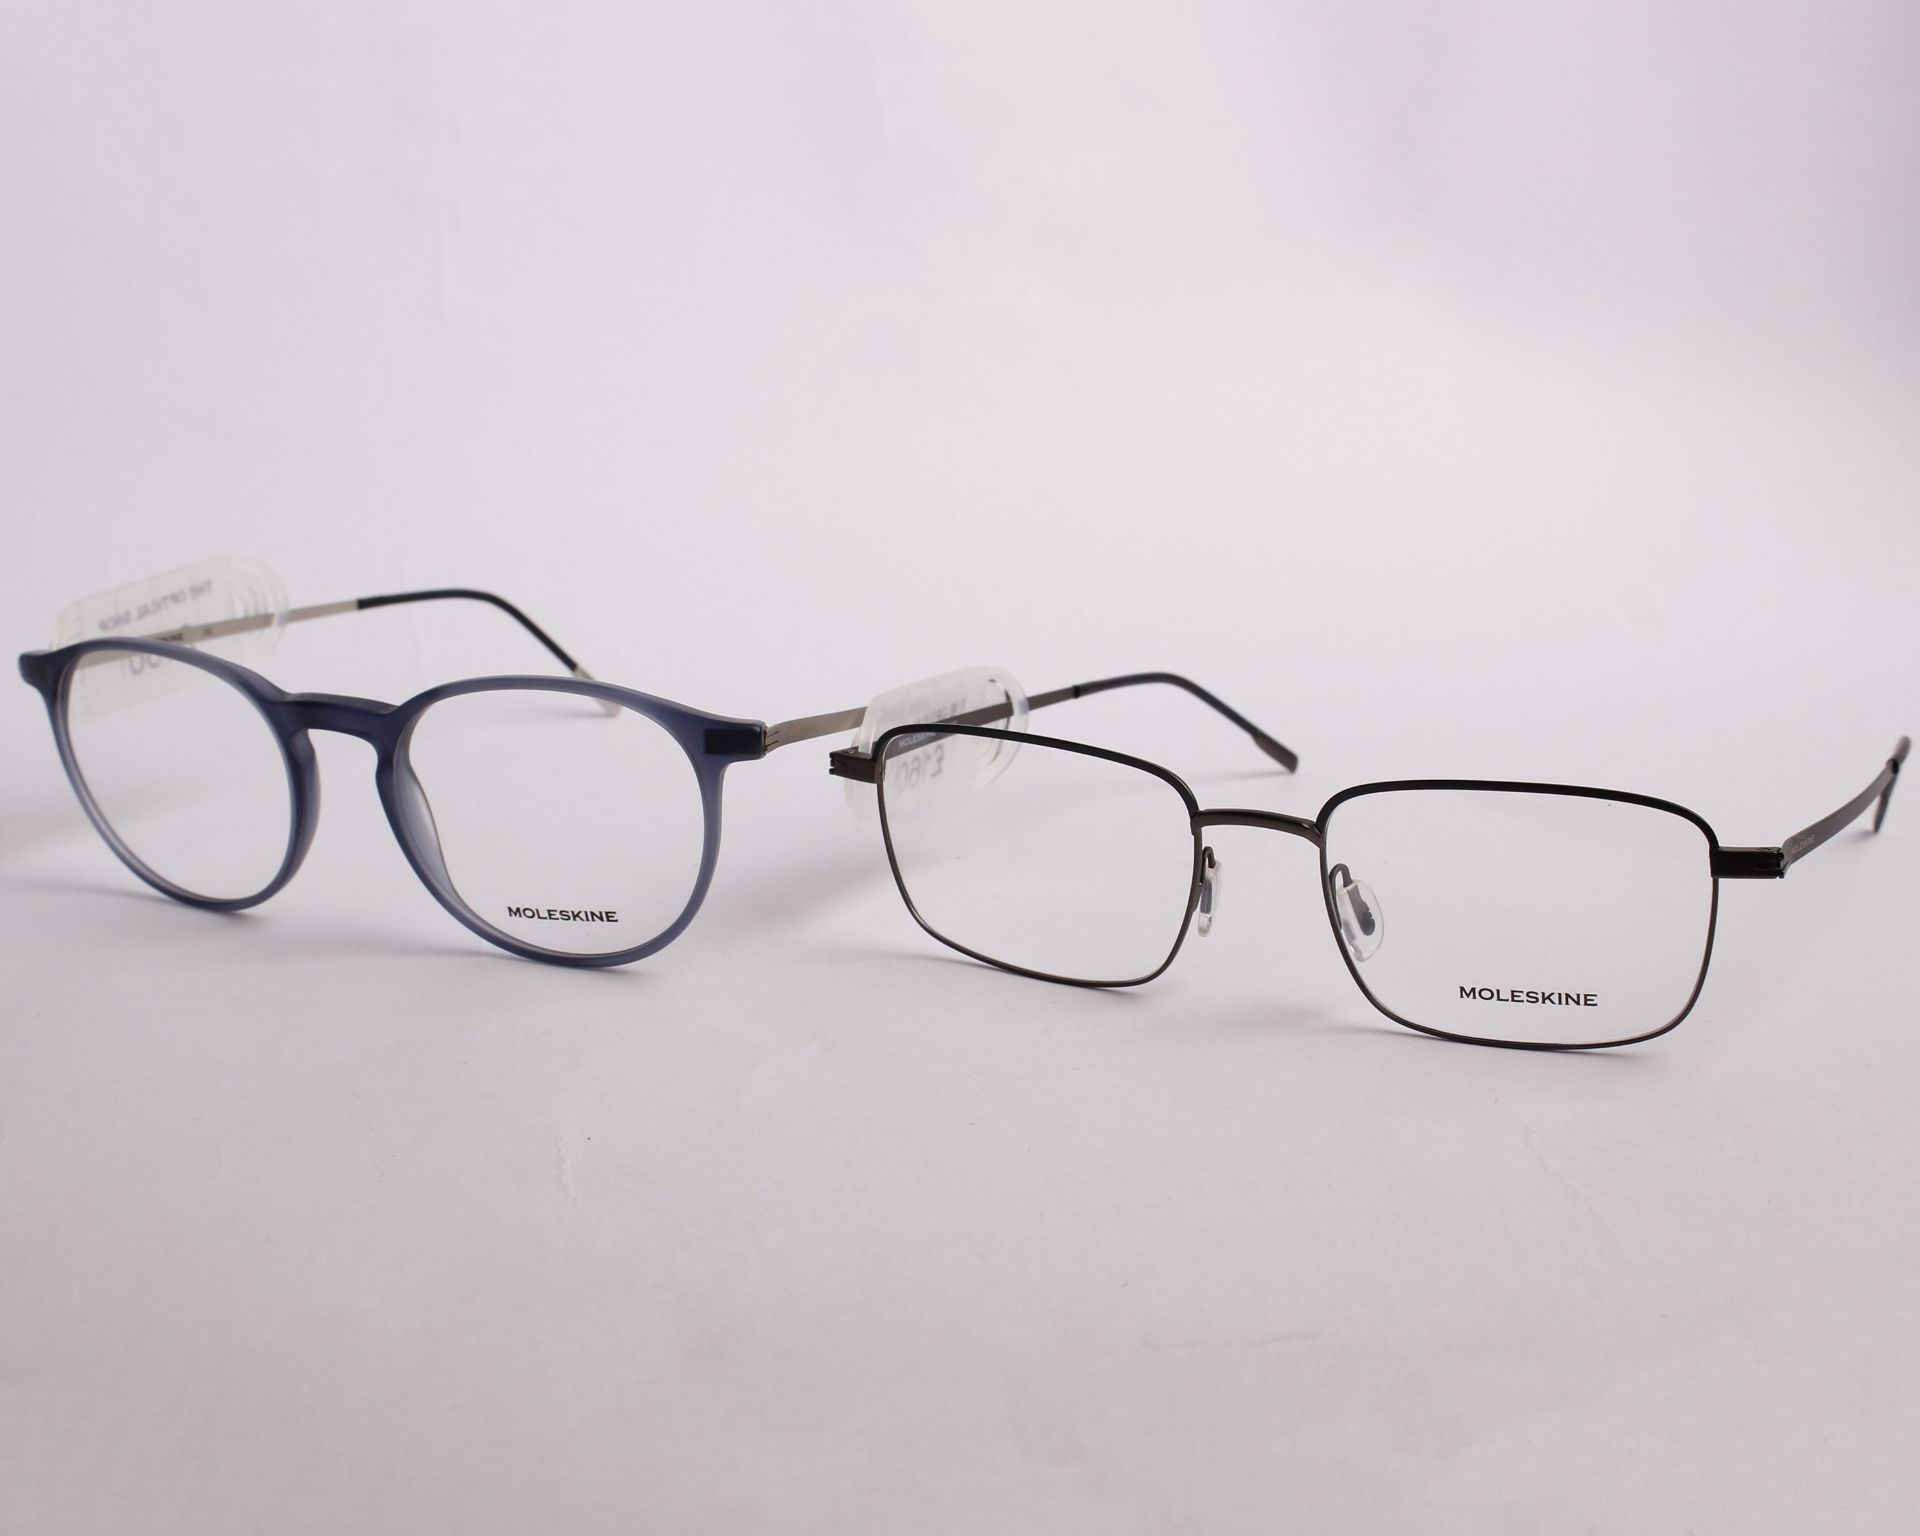 Two pairs of as new Moleskine glasses frames with clear glass (RRP £160 each). - Image 3 of 3